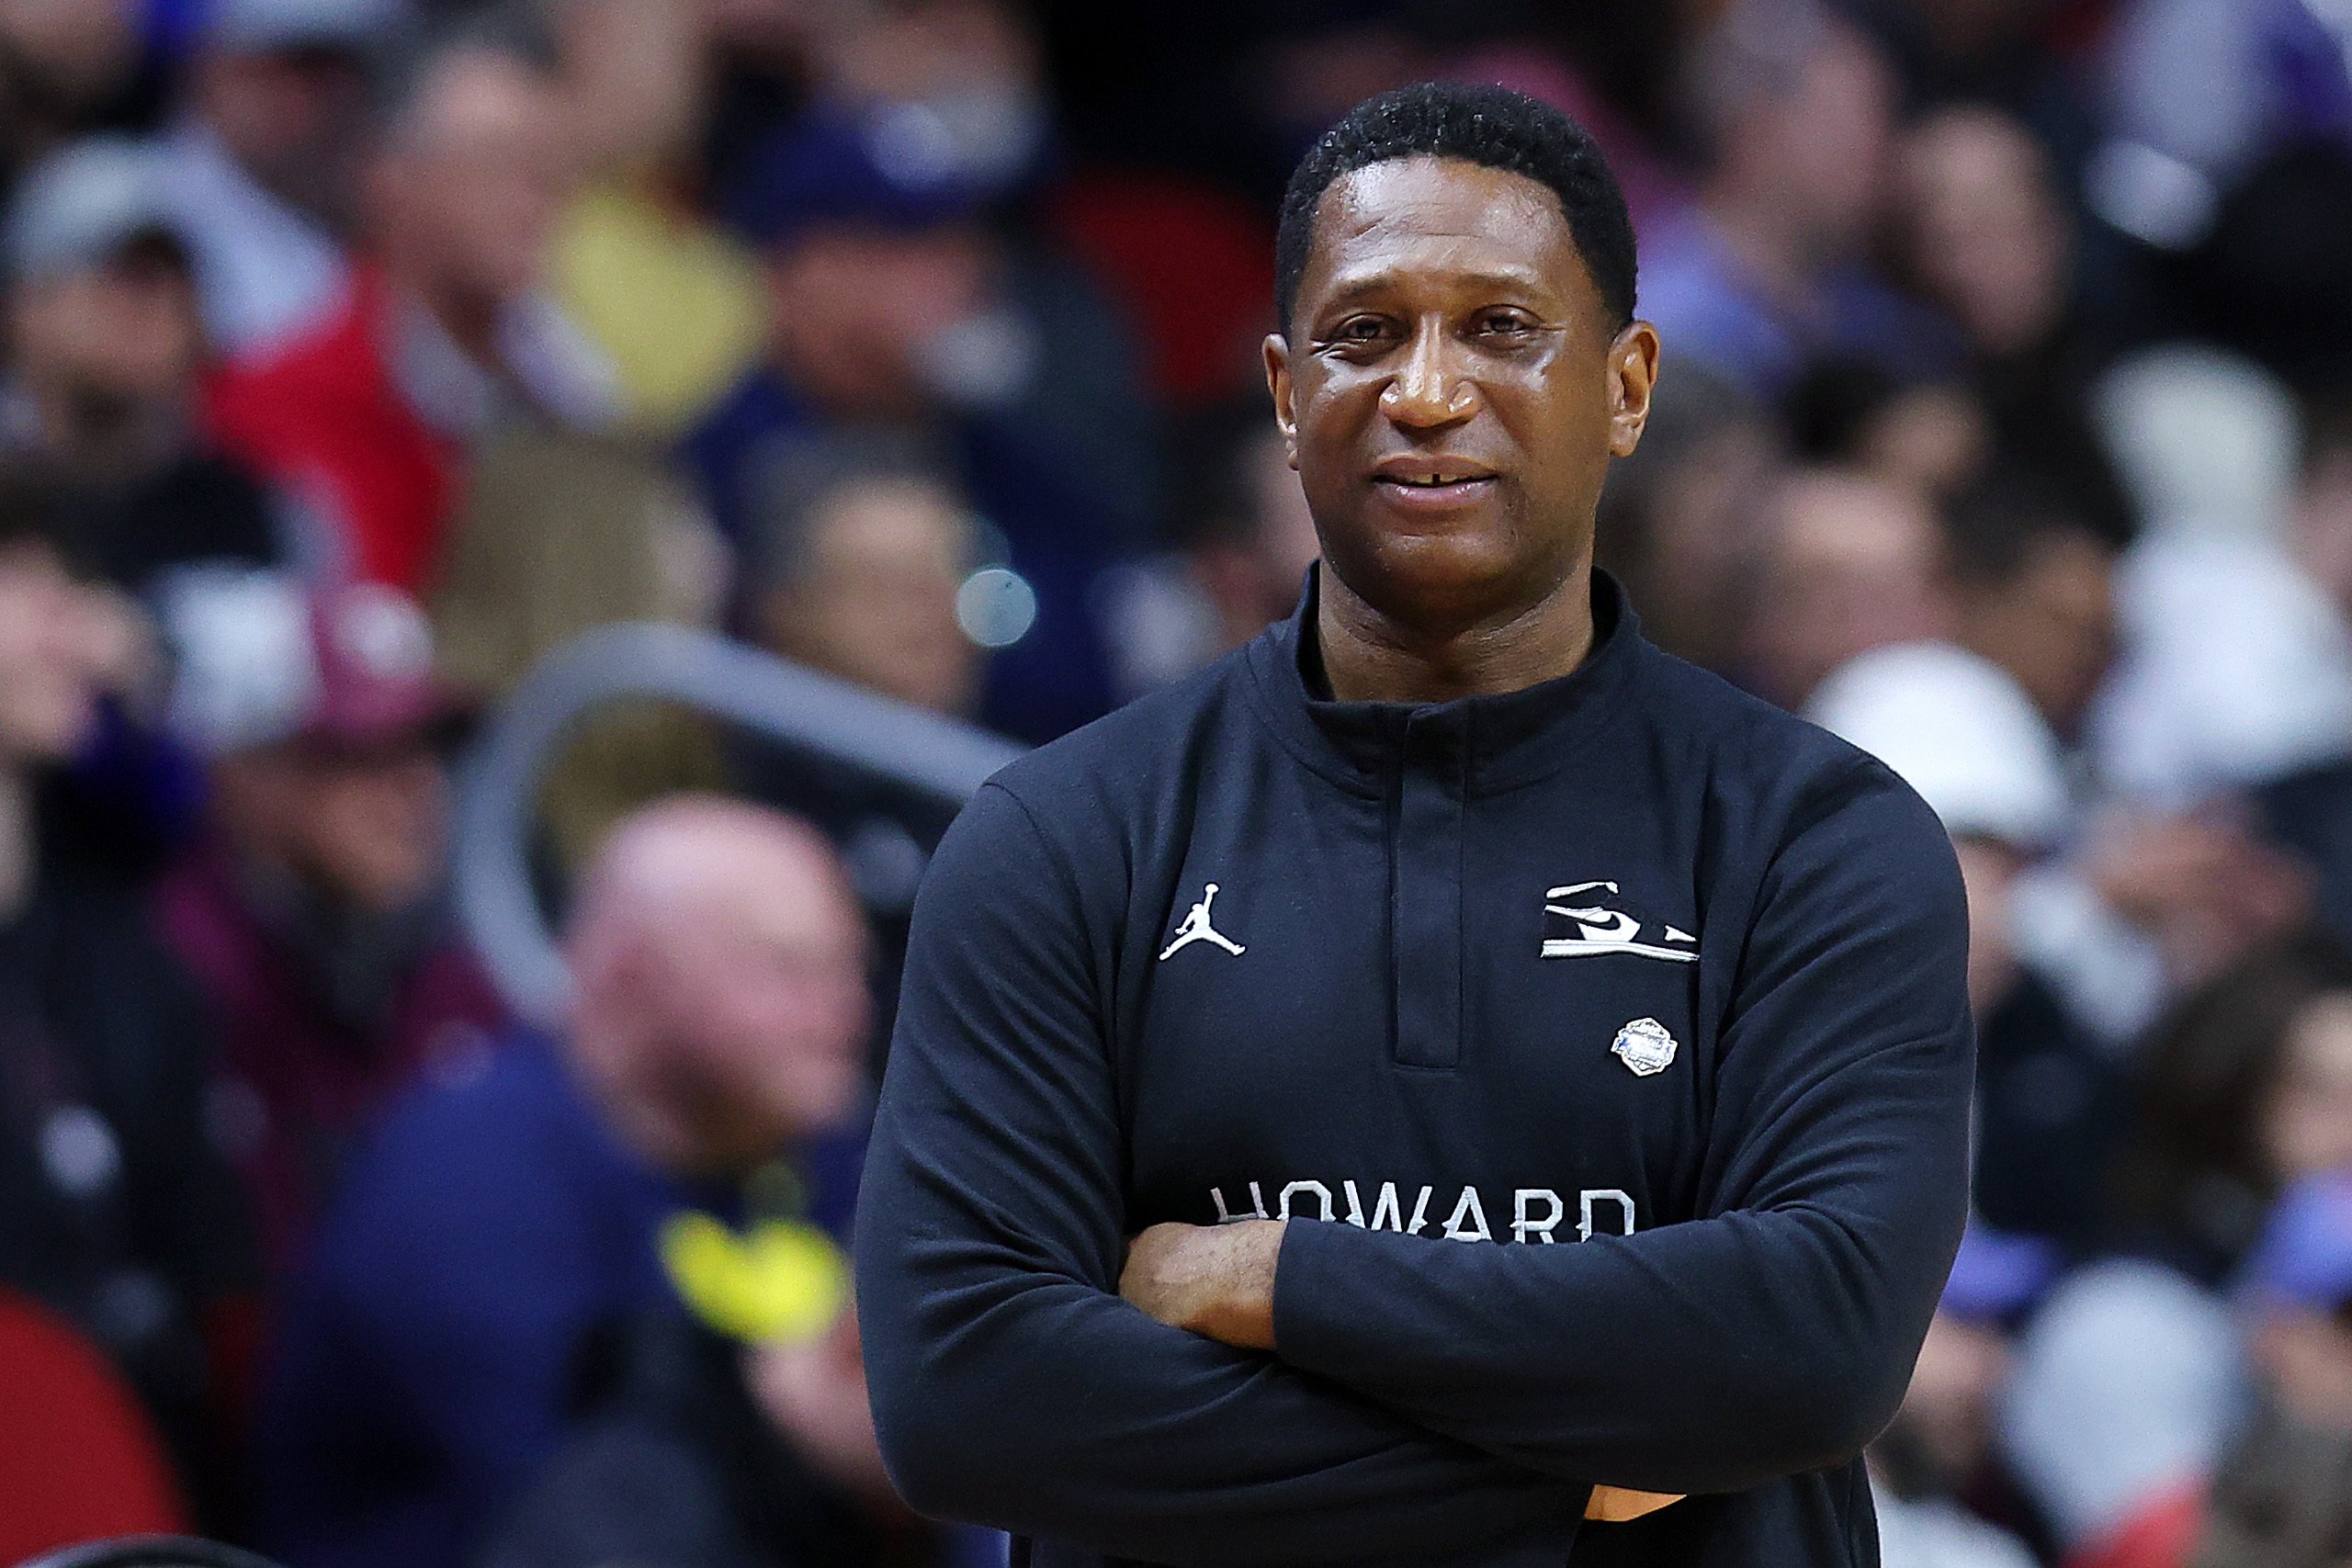 Head coach Kenny Blakeney of the Howard Bison looks on during the first half in the first round of the NCAA Men's Basketball Tournament at Wells Fargo Arena on March 16, 2023, in Des Moines, Iowa. 